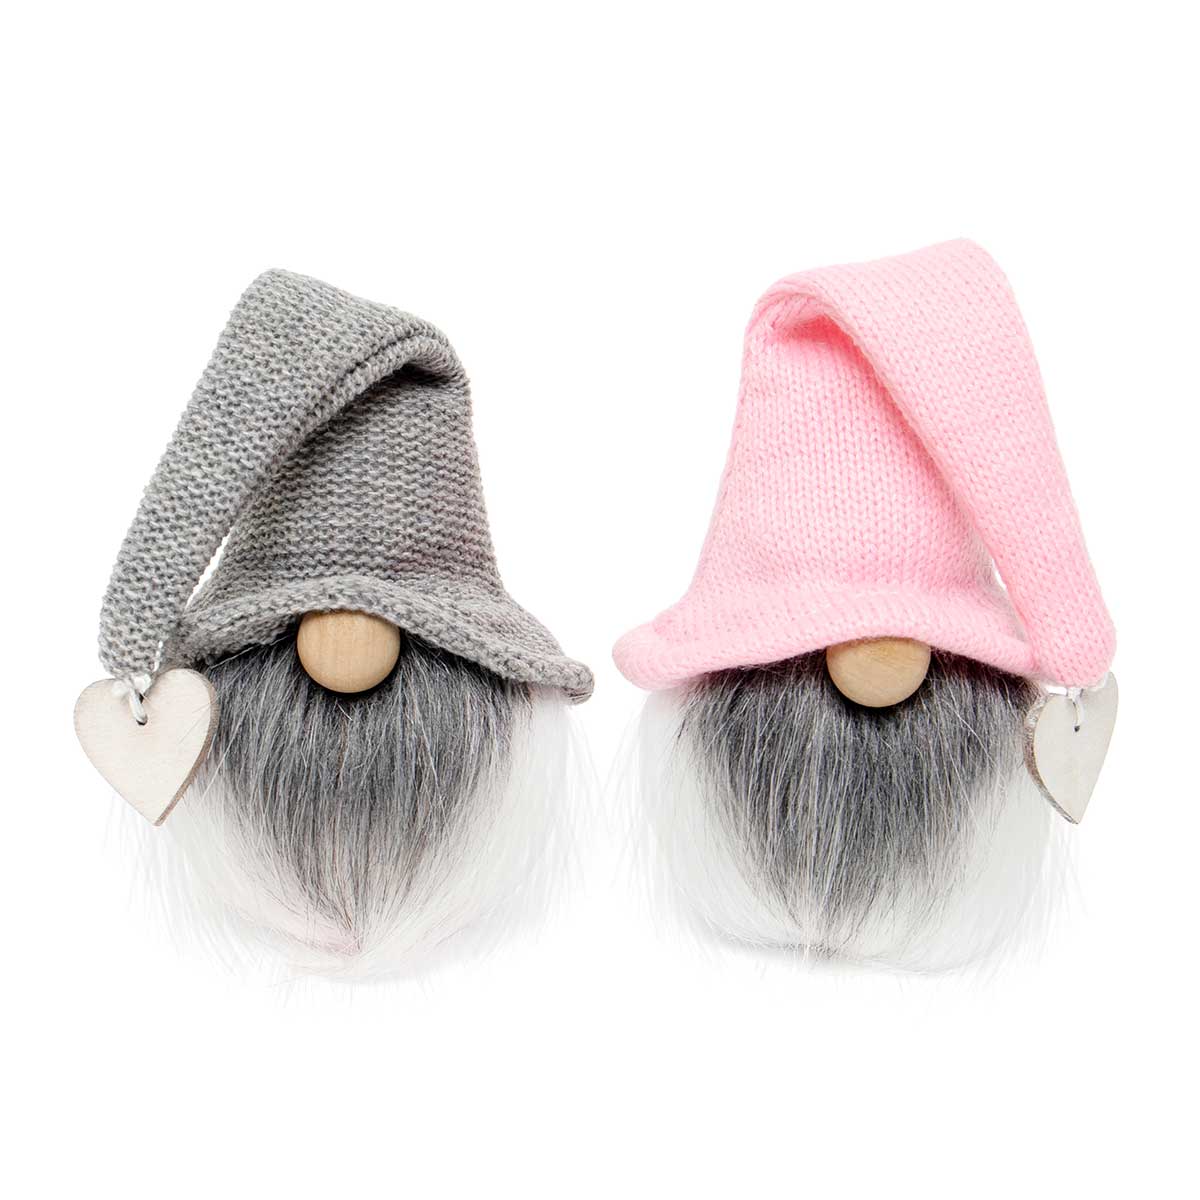 Flop Top Gnome with Heart and White/Grey Beard Sm